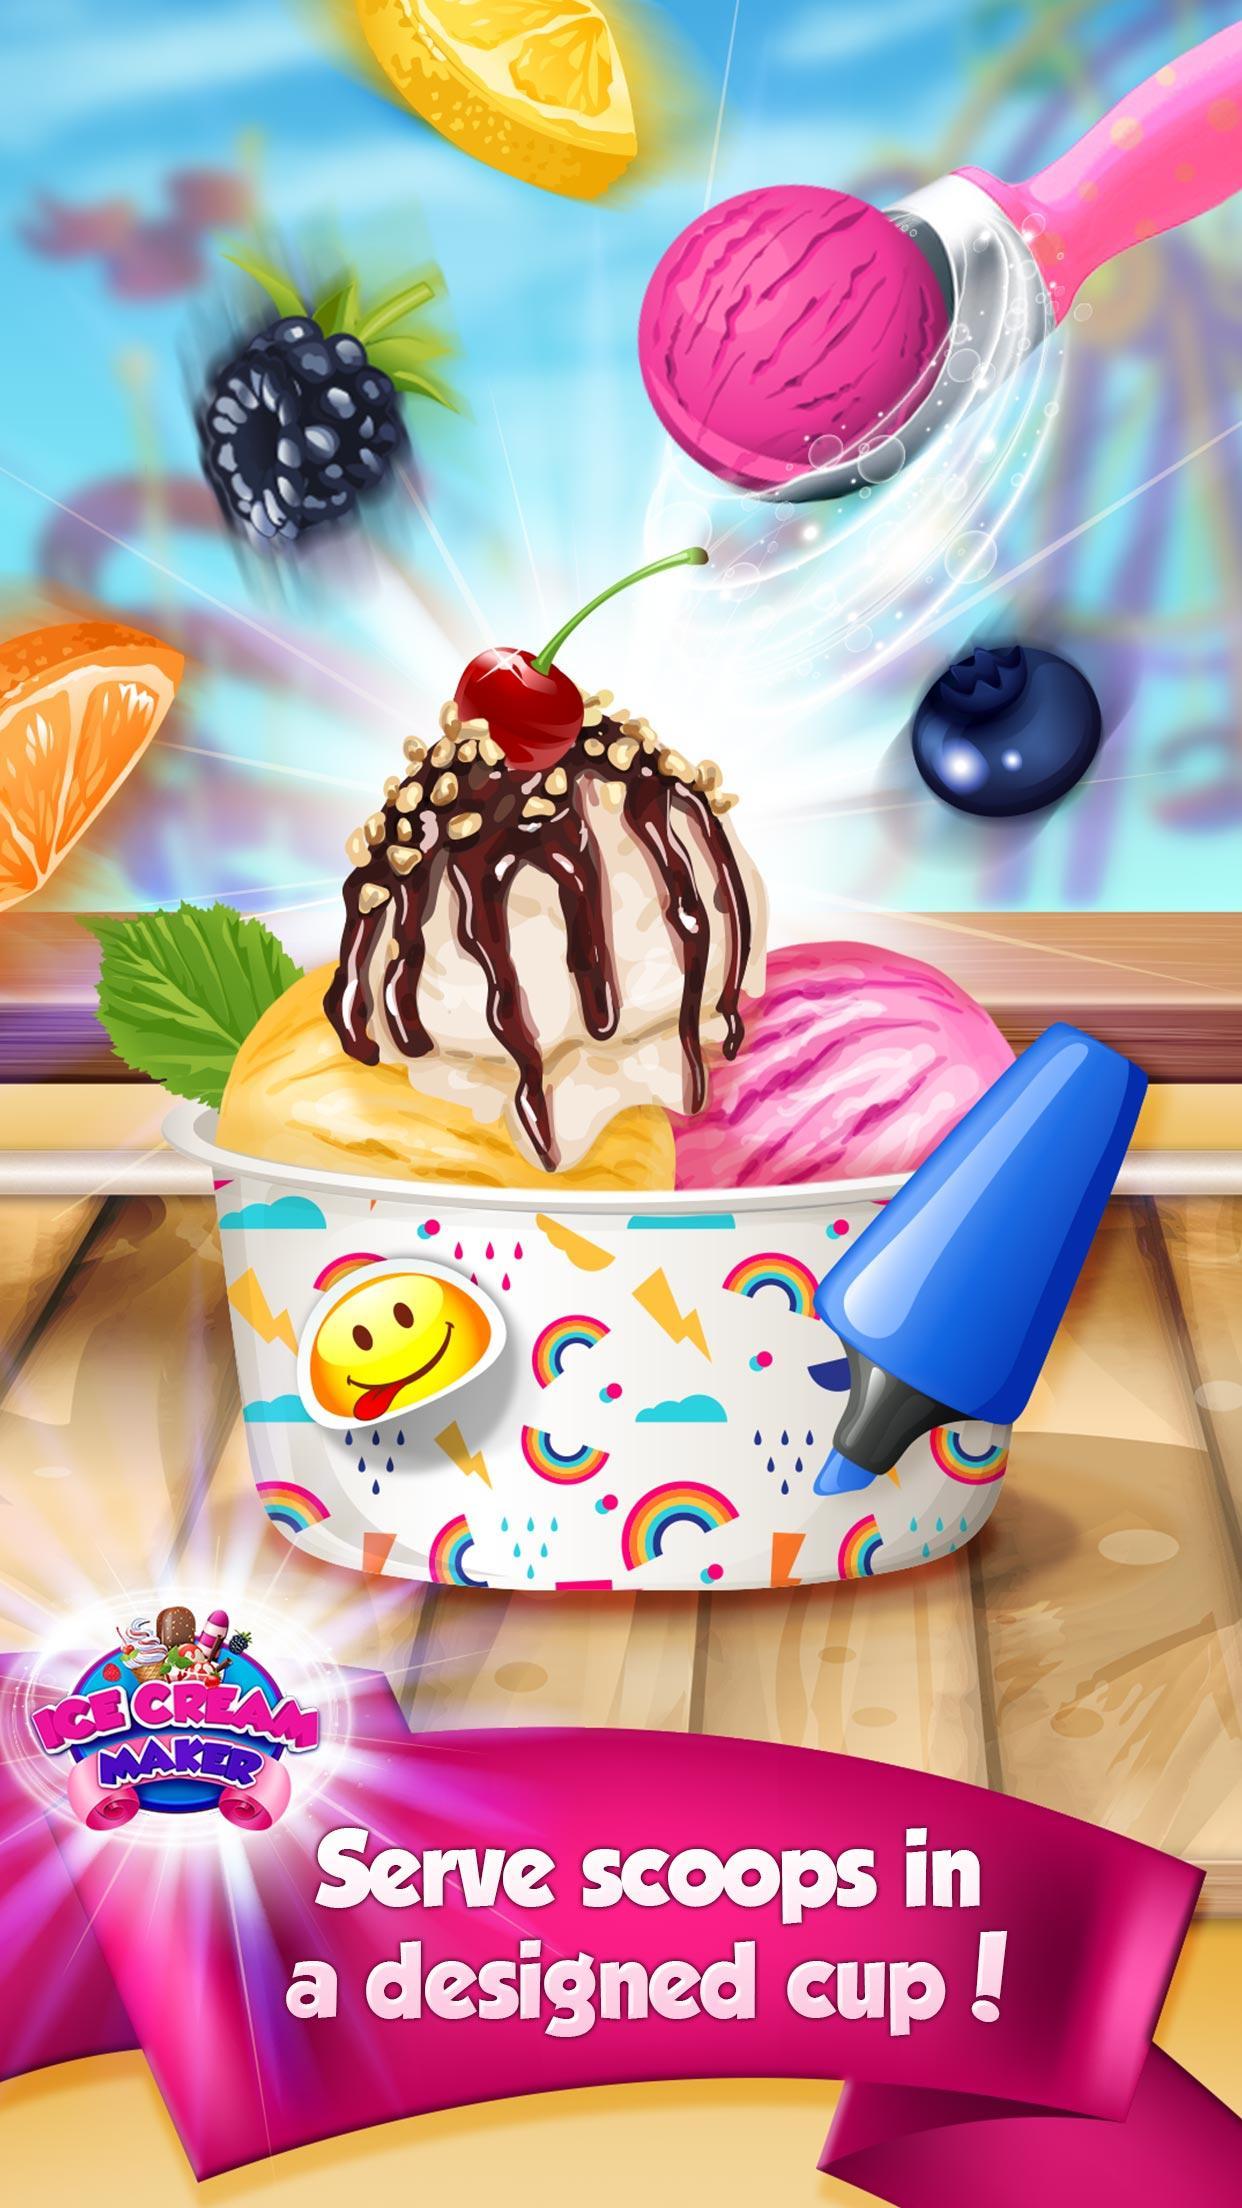 free ice cream and cake games for iphone download